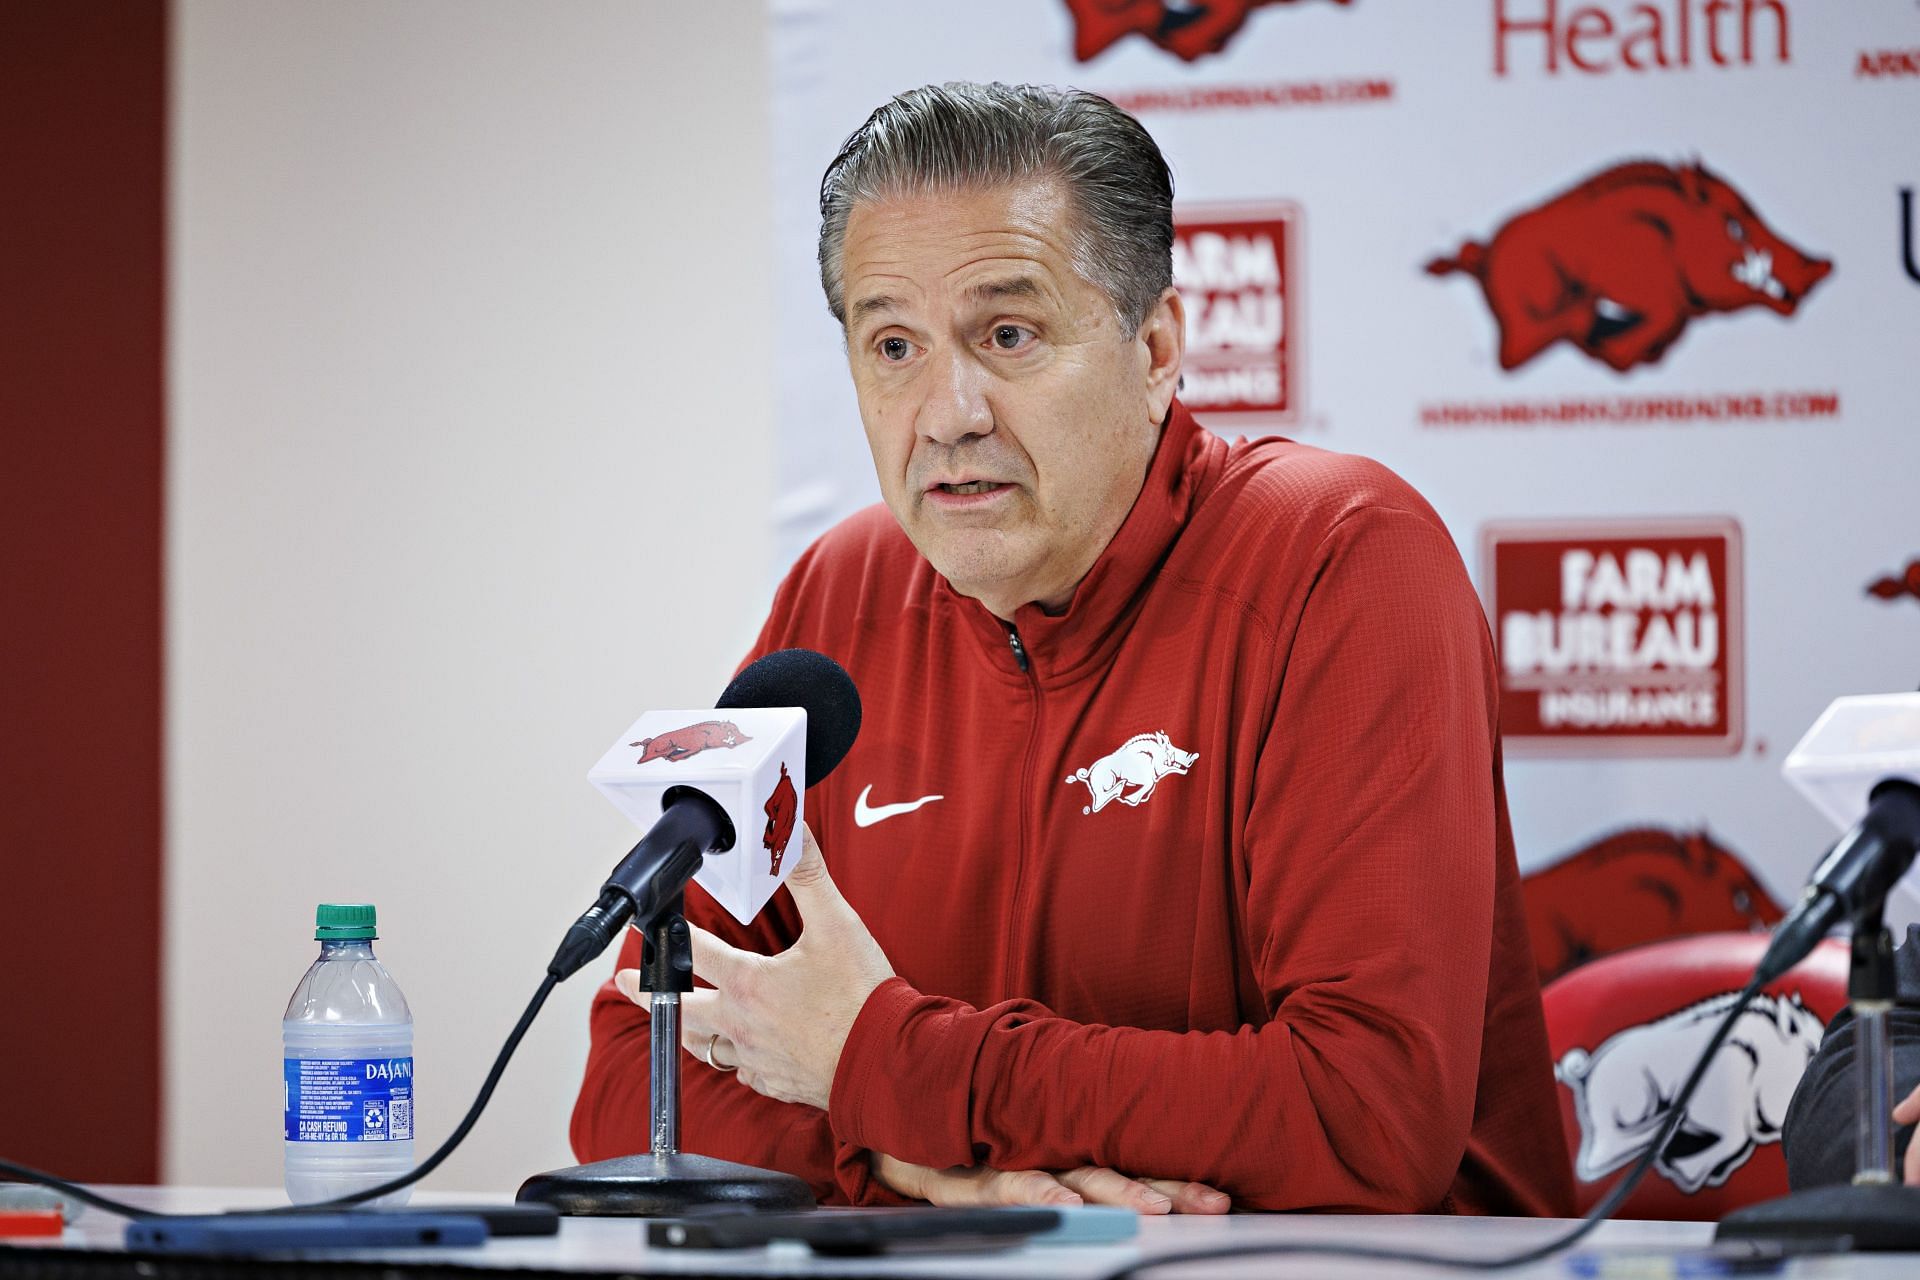 New Arkansas coach John Calipari would love to gain Pryor in the transfer portal as he is a big man who can shoot from the outside and defend the post with conviction.